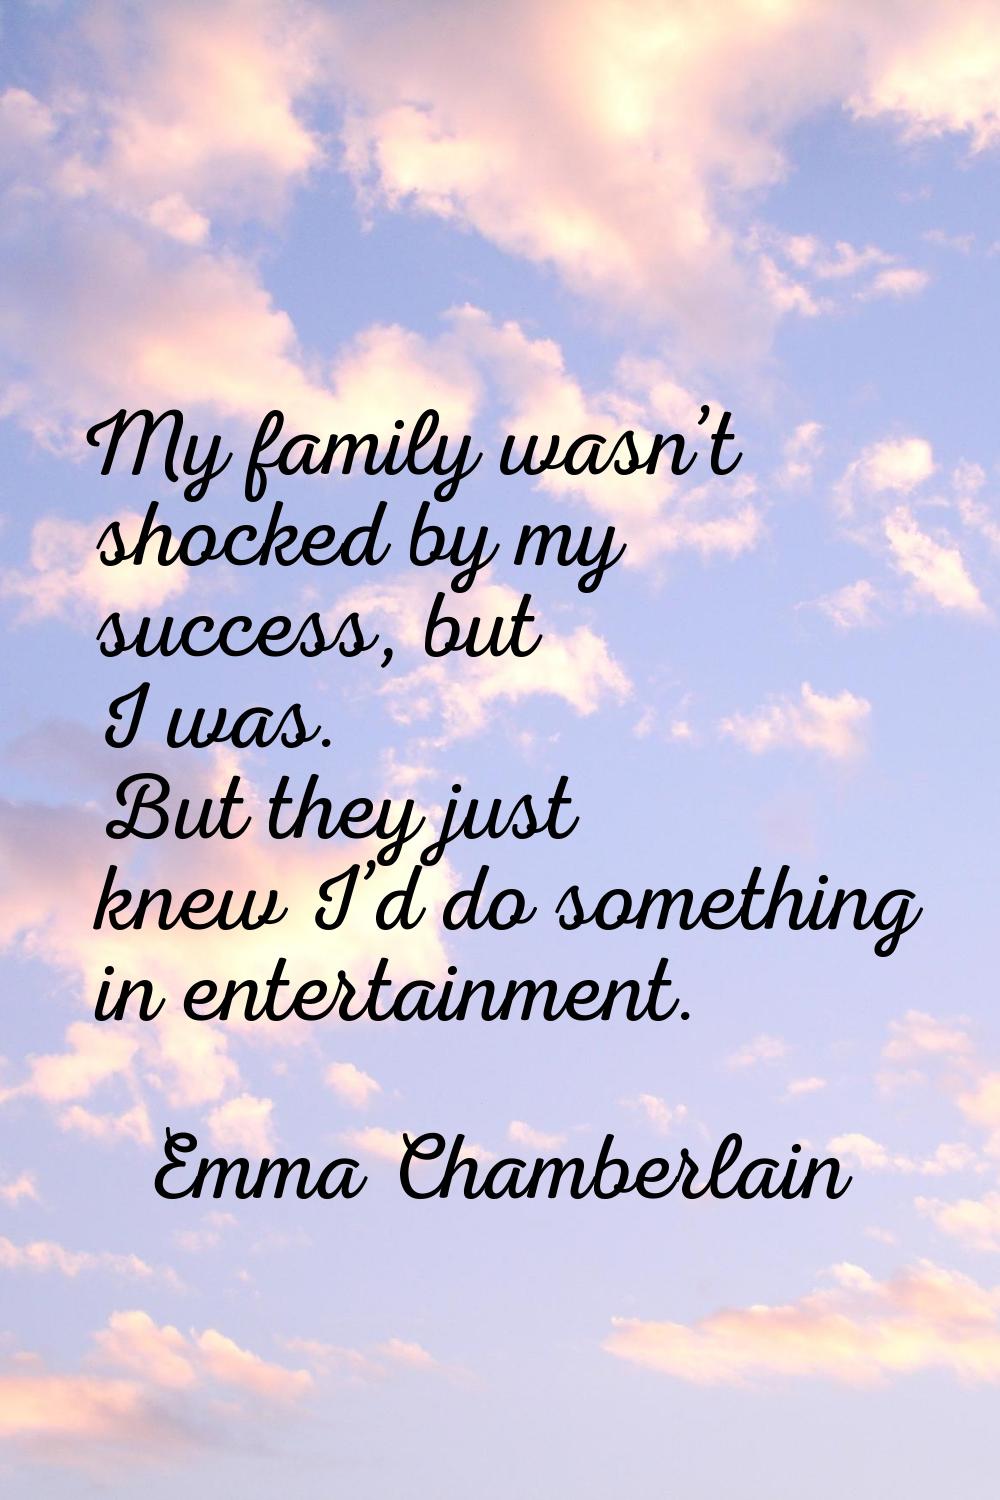 My family wasn’t shocked by my success, but I was. But they just knew I’d do something in entertain